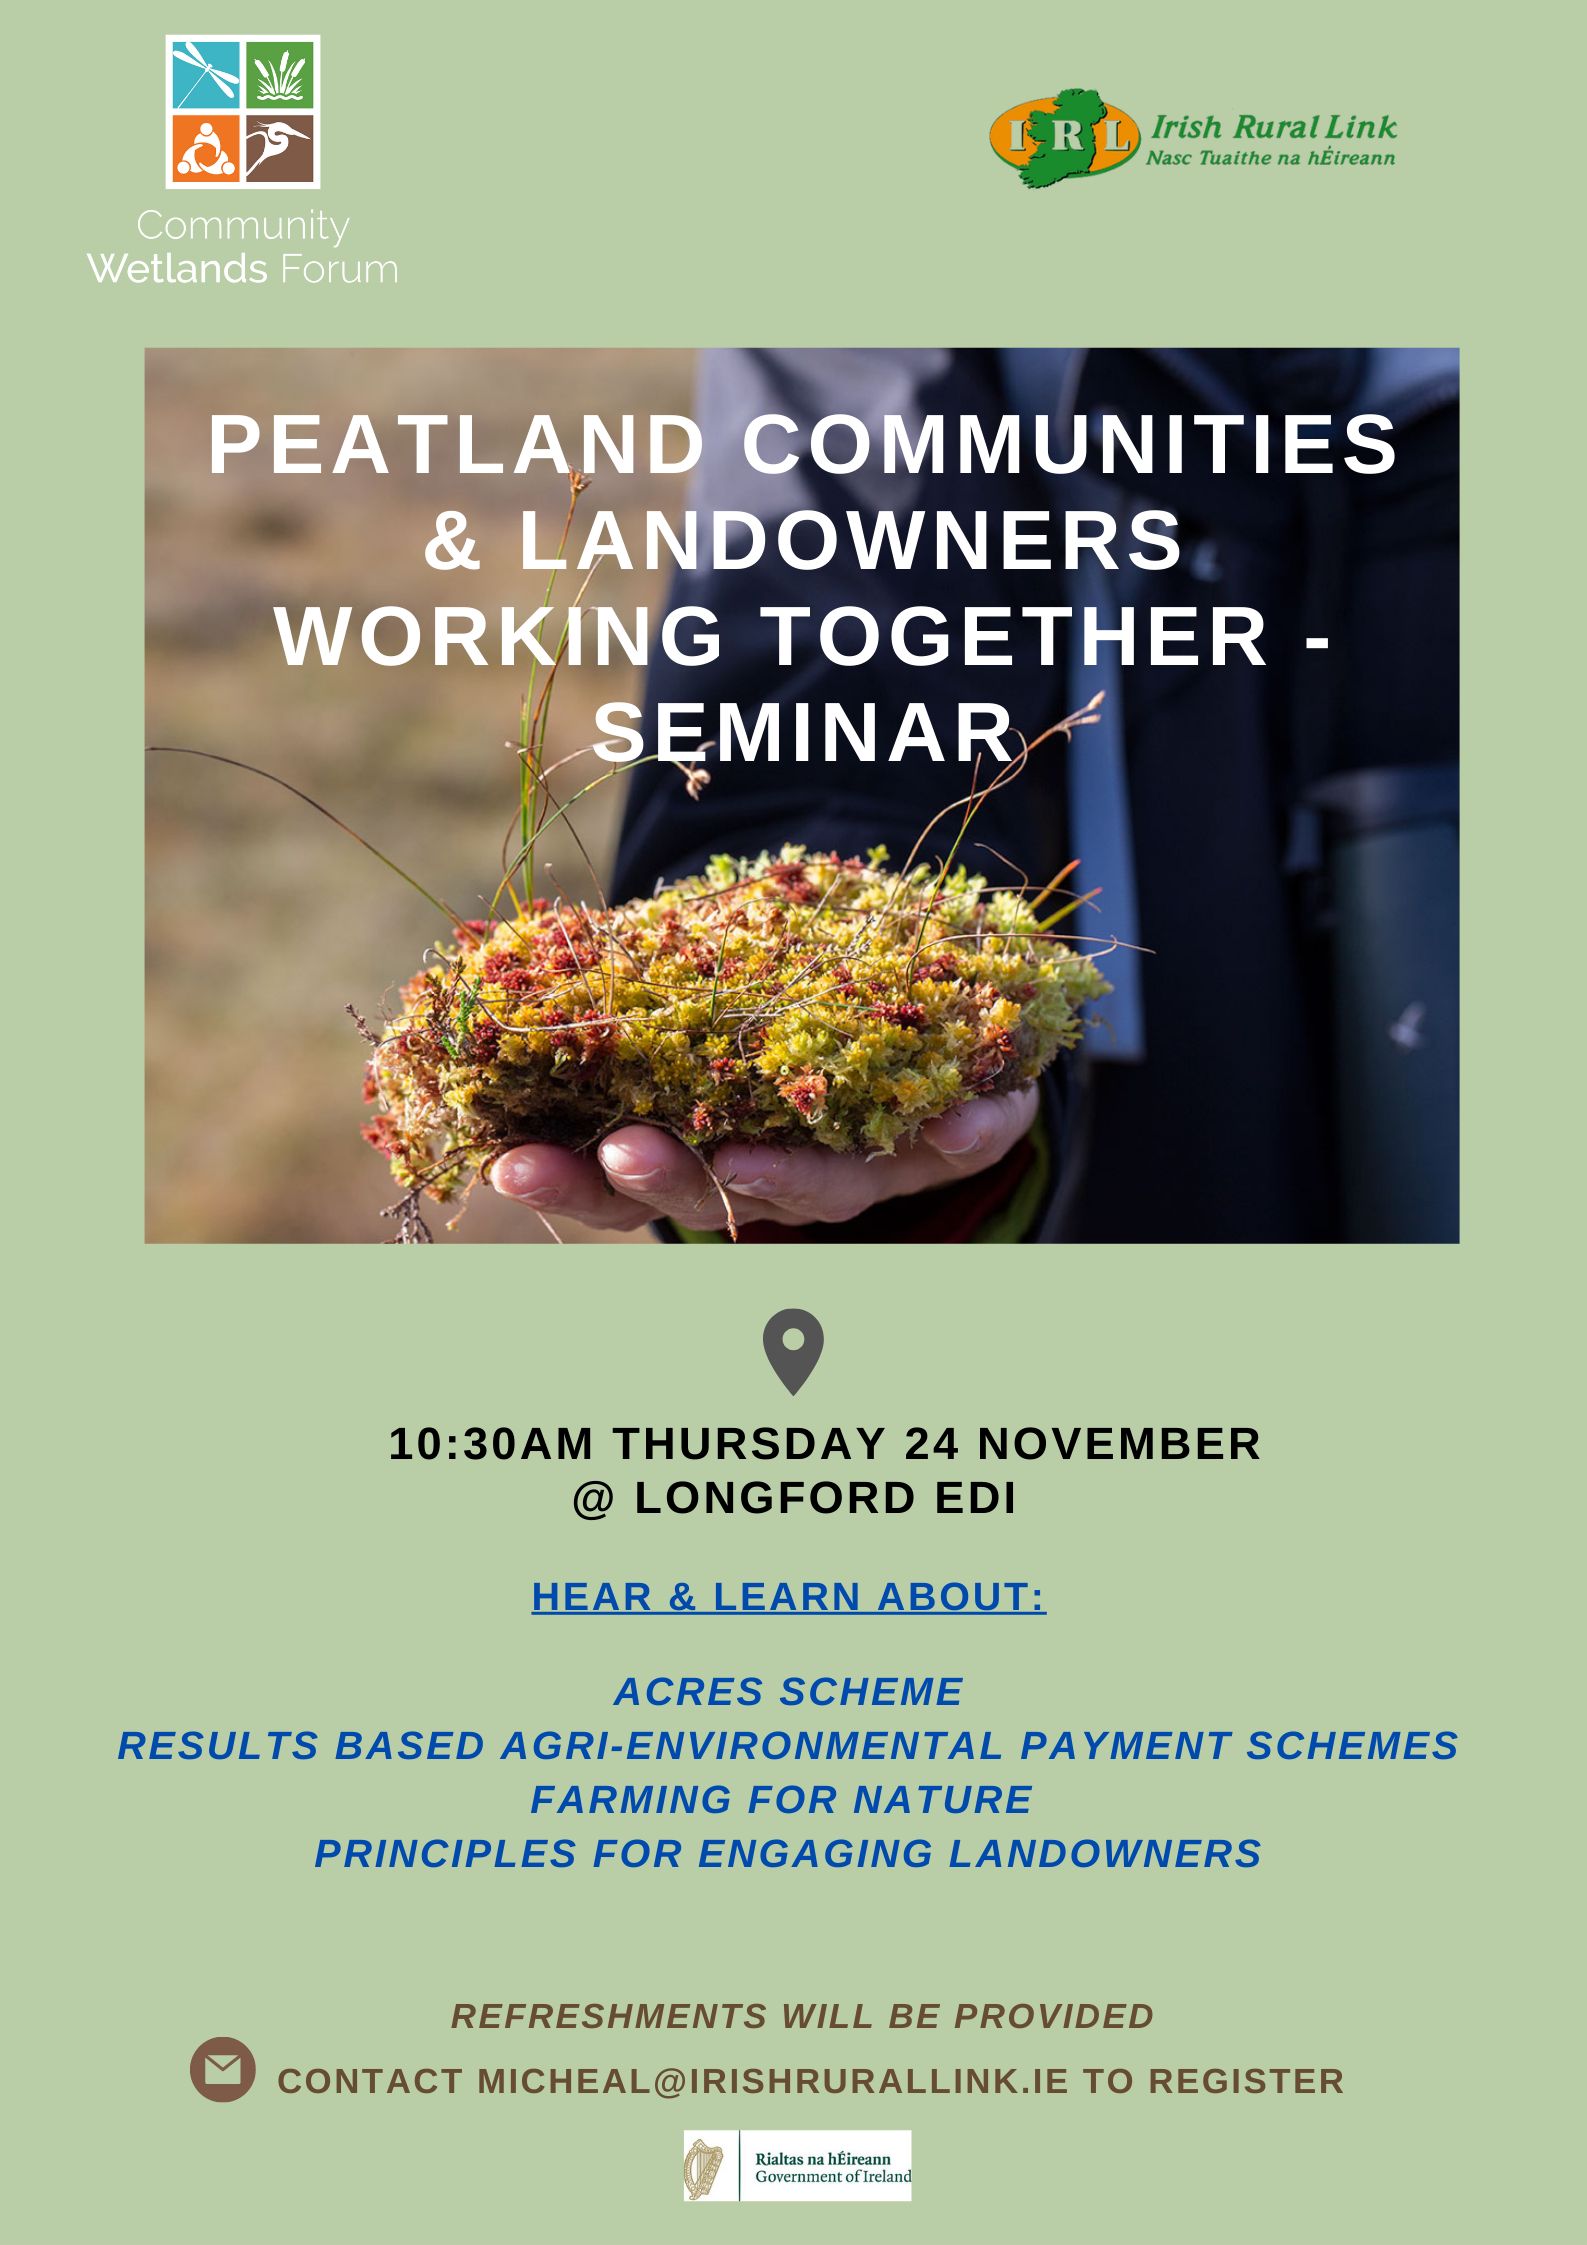 https://kcrjss.stripocdn.email/content/guids/CABINET_6a342fa9fd388bb9572e992c721cf905/images/peatland_communities_and_landowners_poster.png